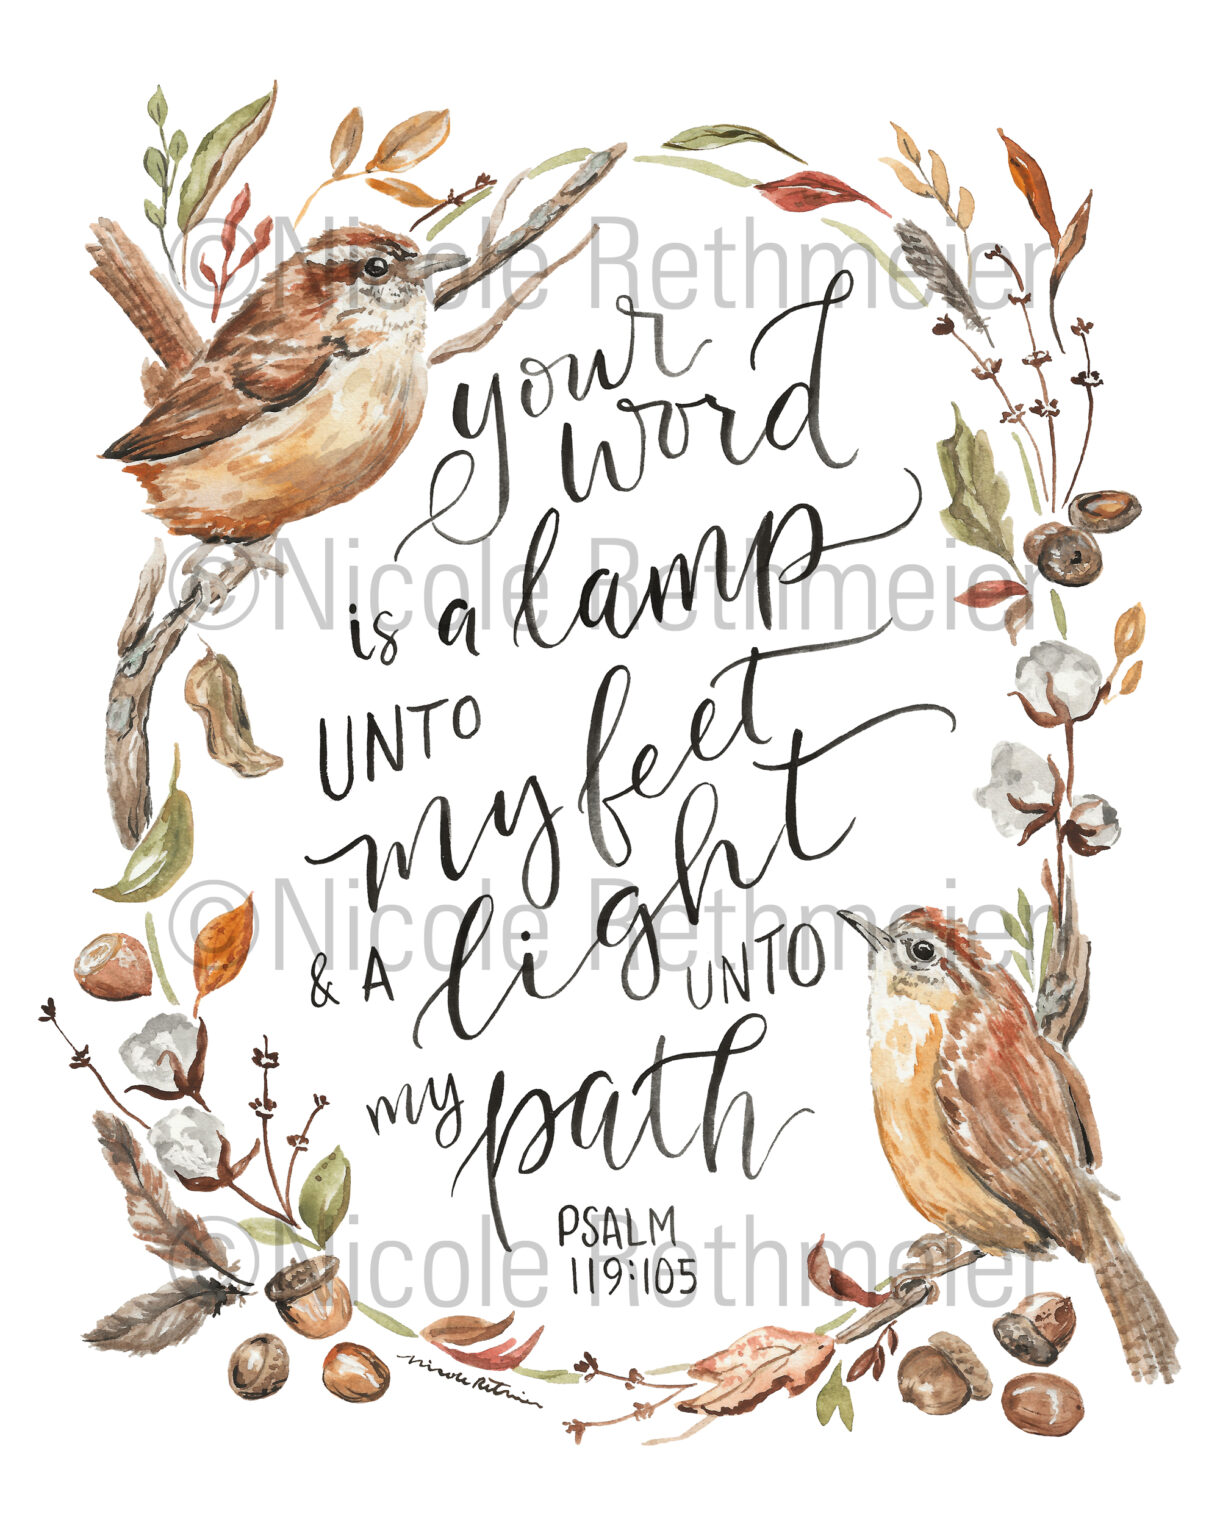 Your Word is a Lamp Psalm 119:105 - Carolina wren and fall foliage watercolor